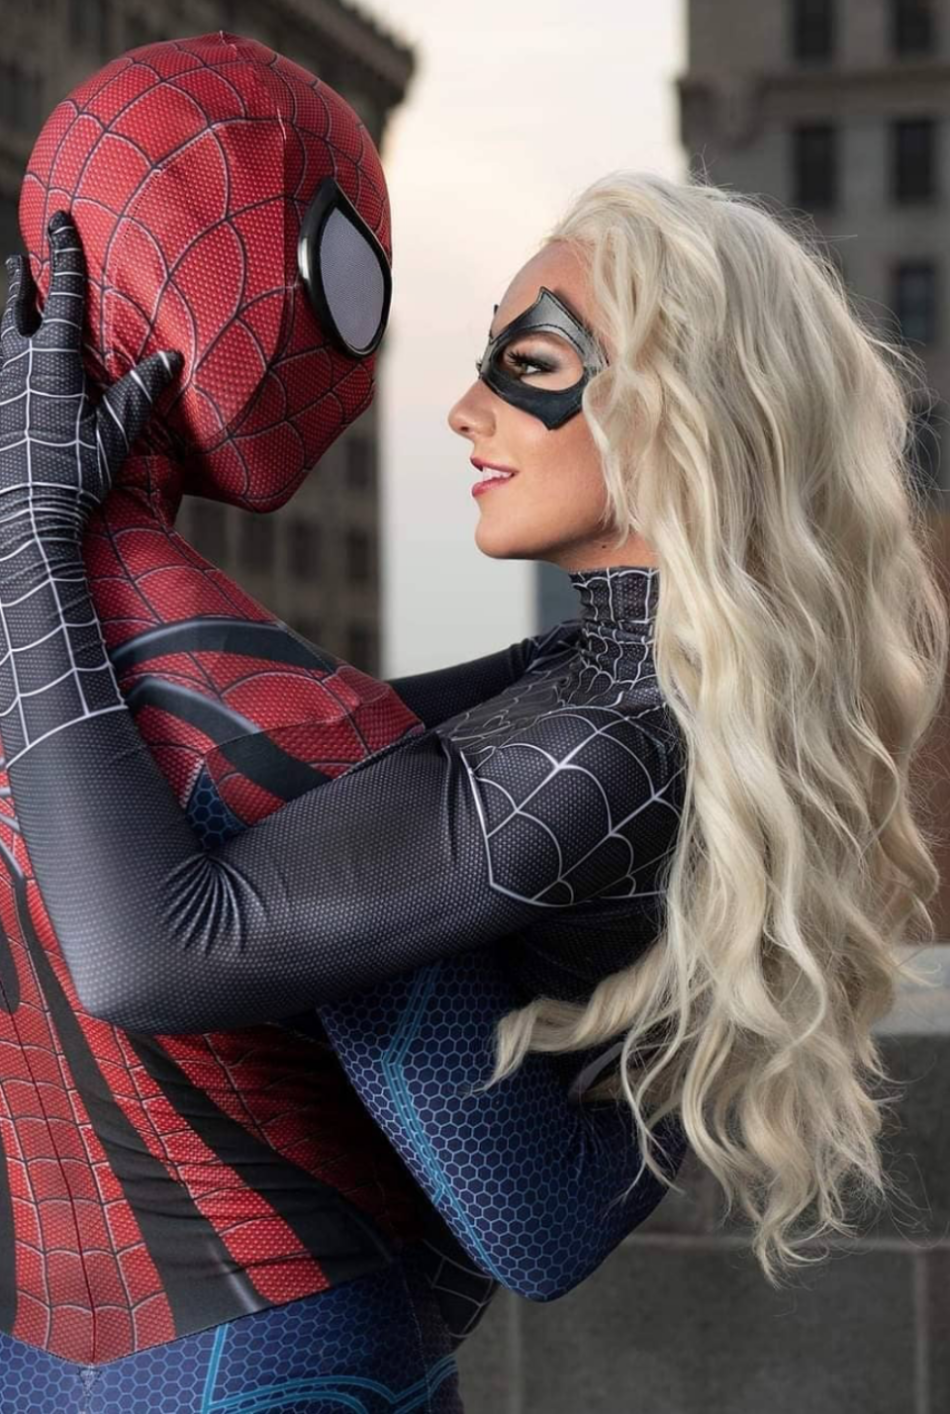 Sexy Red Hot Cosplay Girls Spiderman Women Best Photo Compilation 2021 (89 HQ Photos) 199